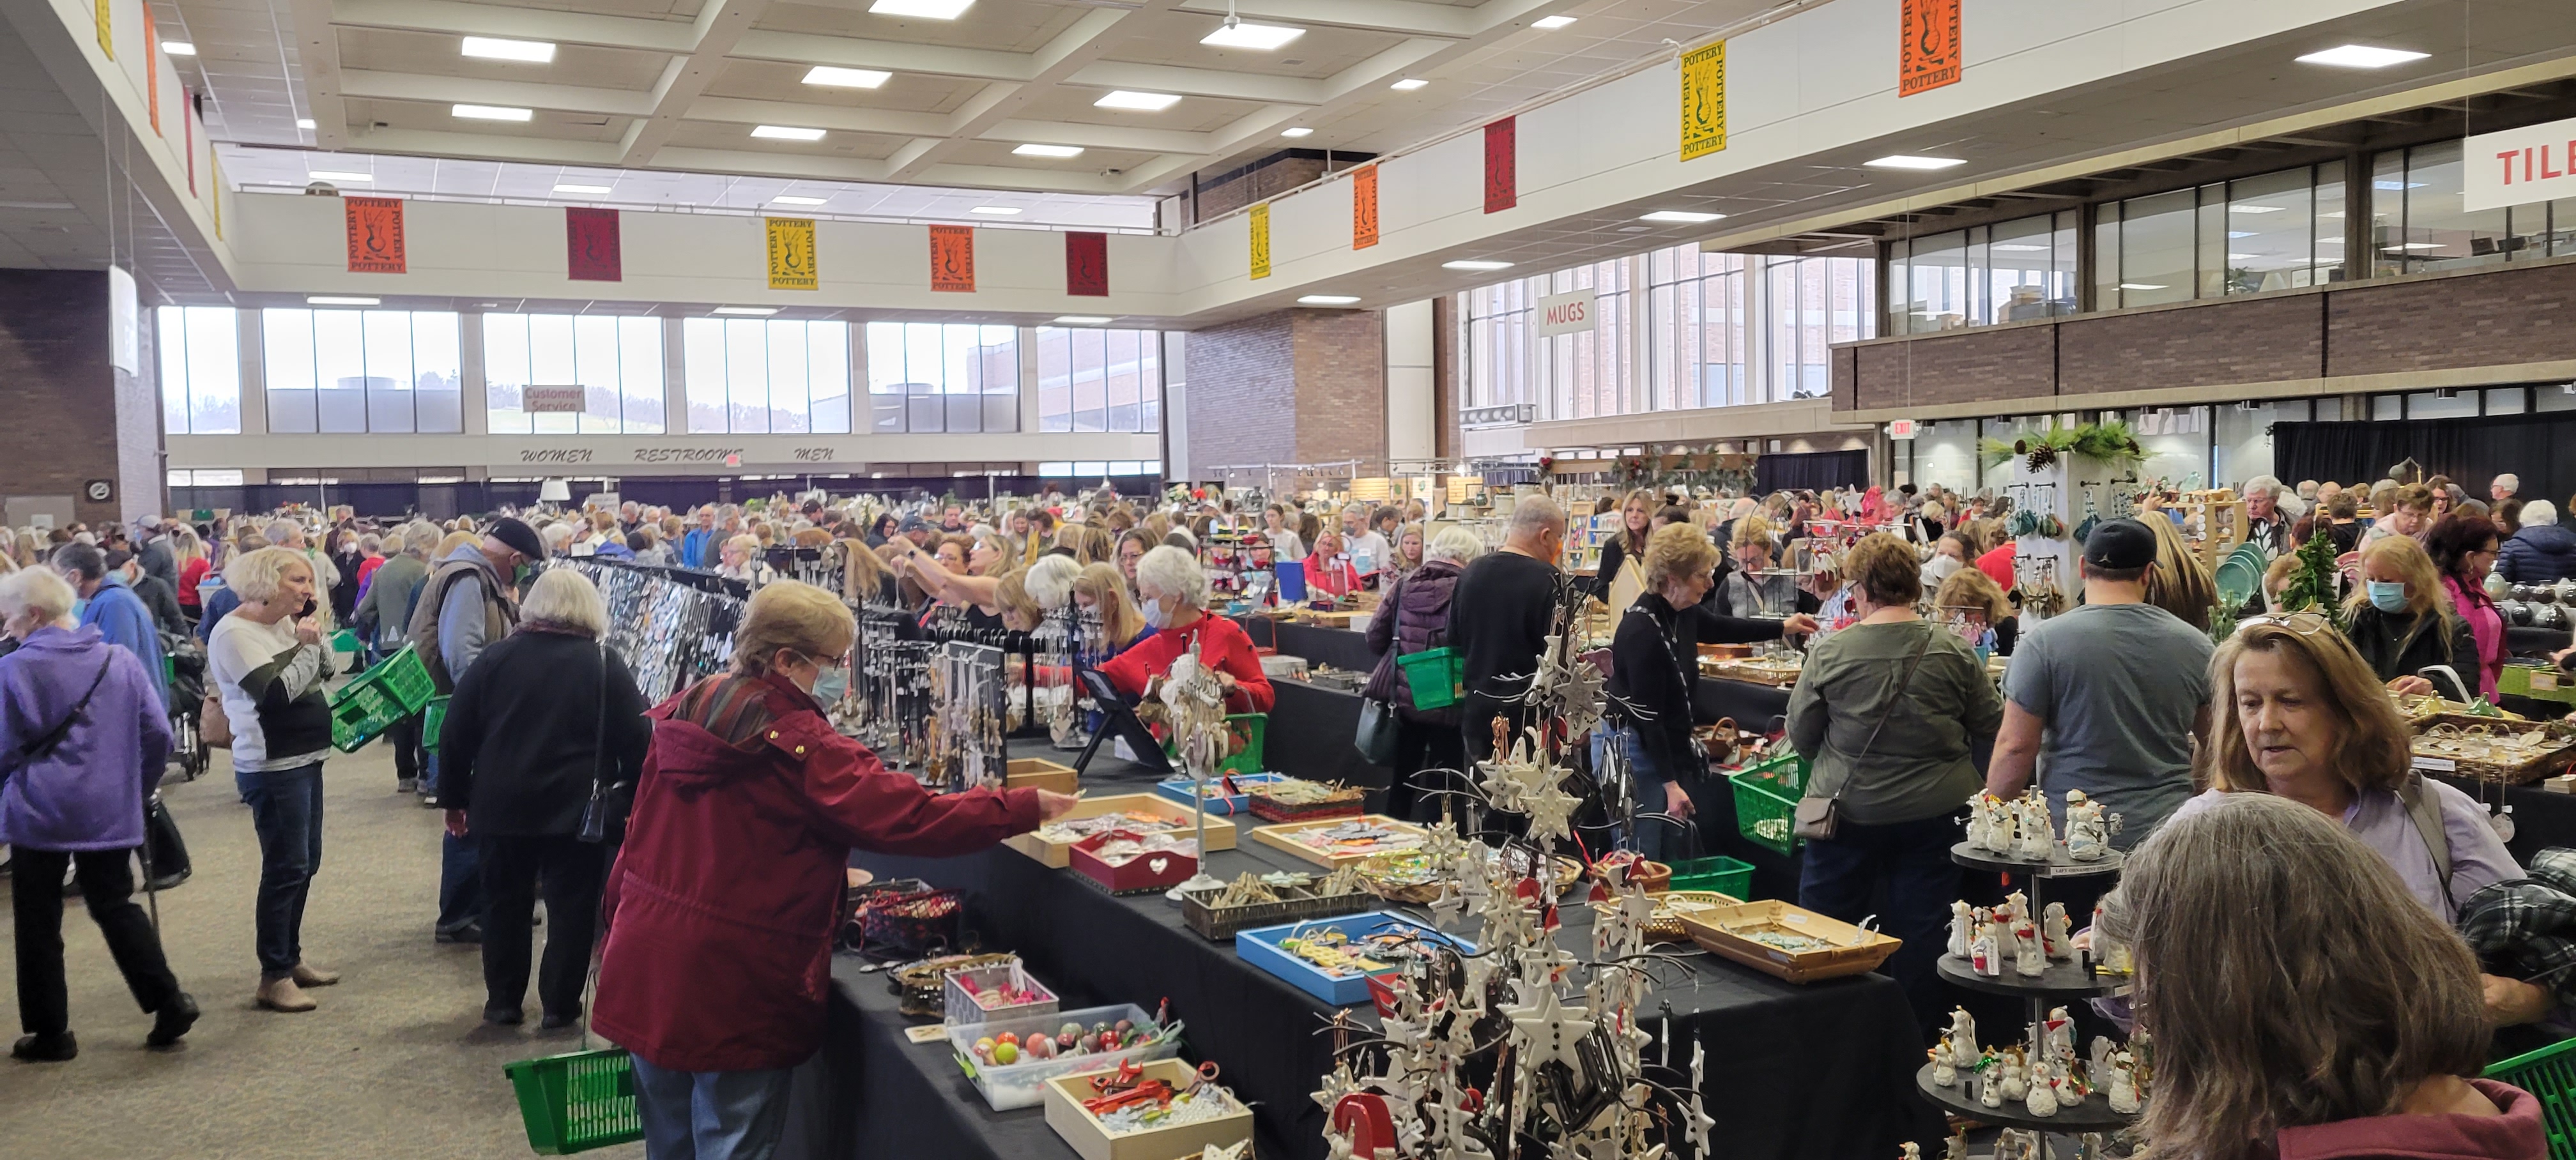 The Potters Market is held at the Southfield Pavilion, at 26000 Evergreen Rd., in Southfield, Michigan. Photos by Katherine Warden 